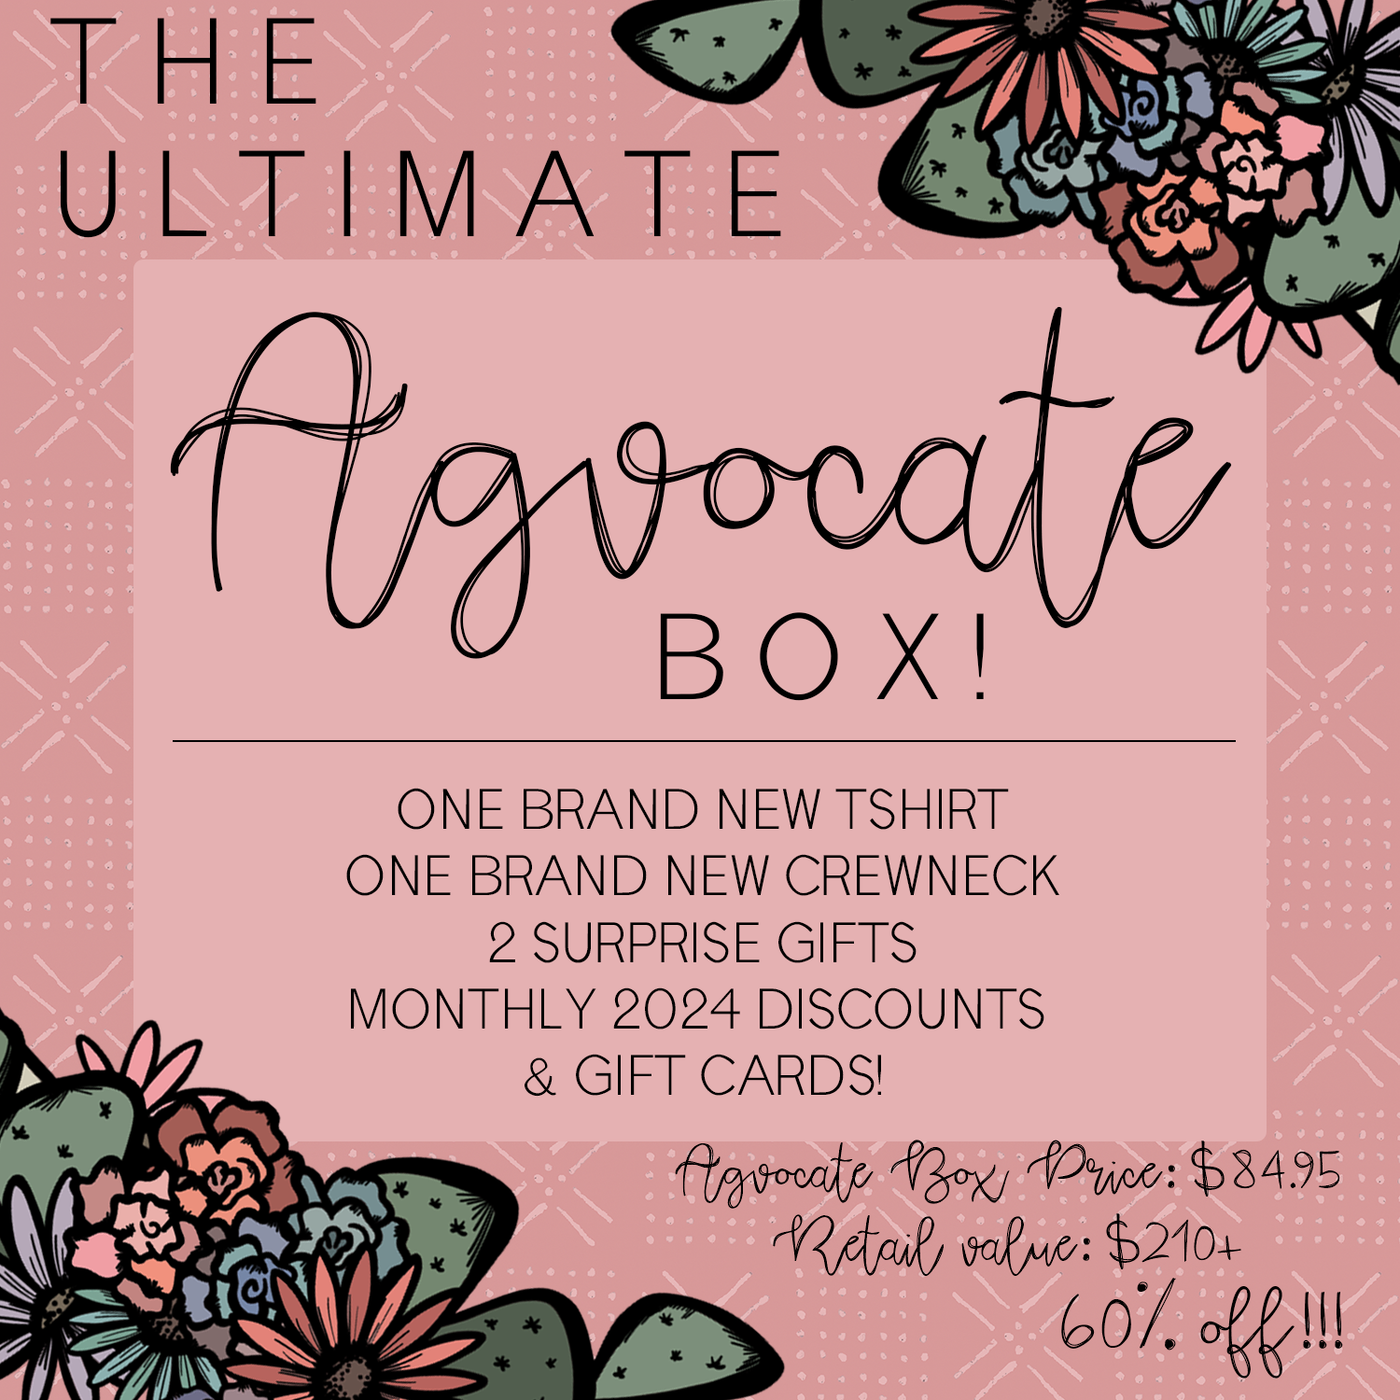 The ULTIMATE Agvocate Box!